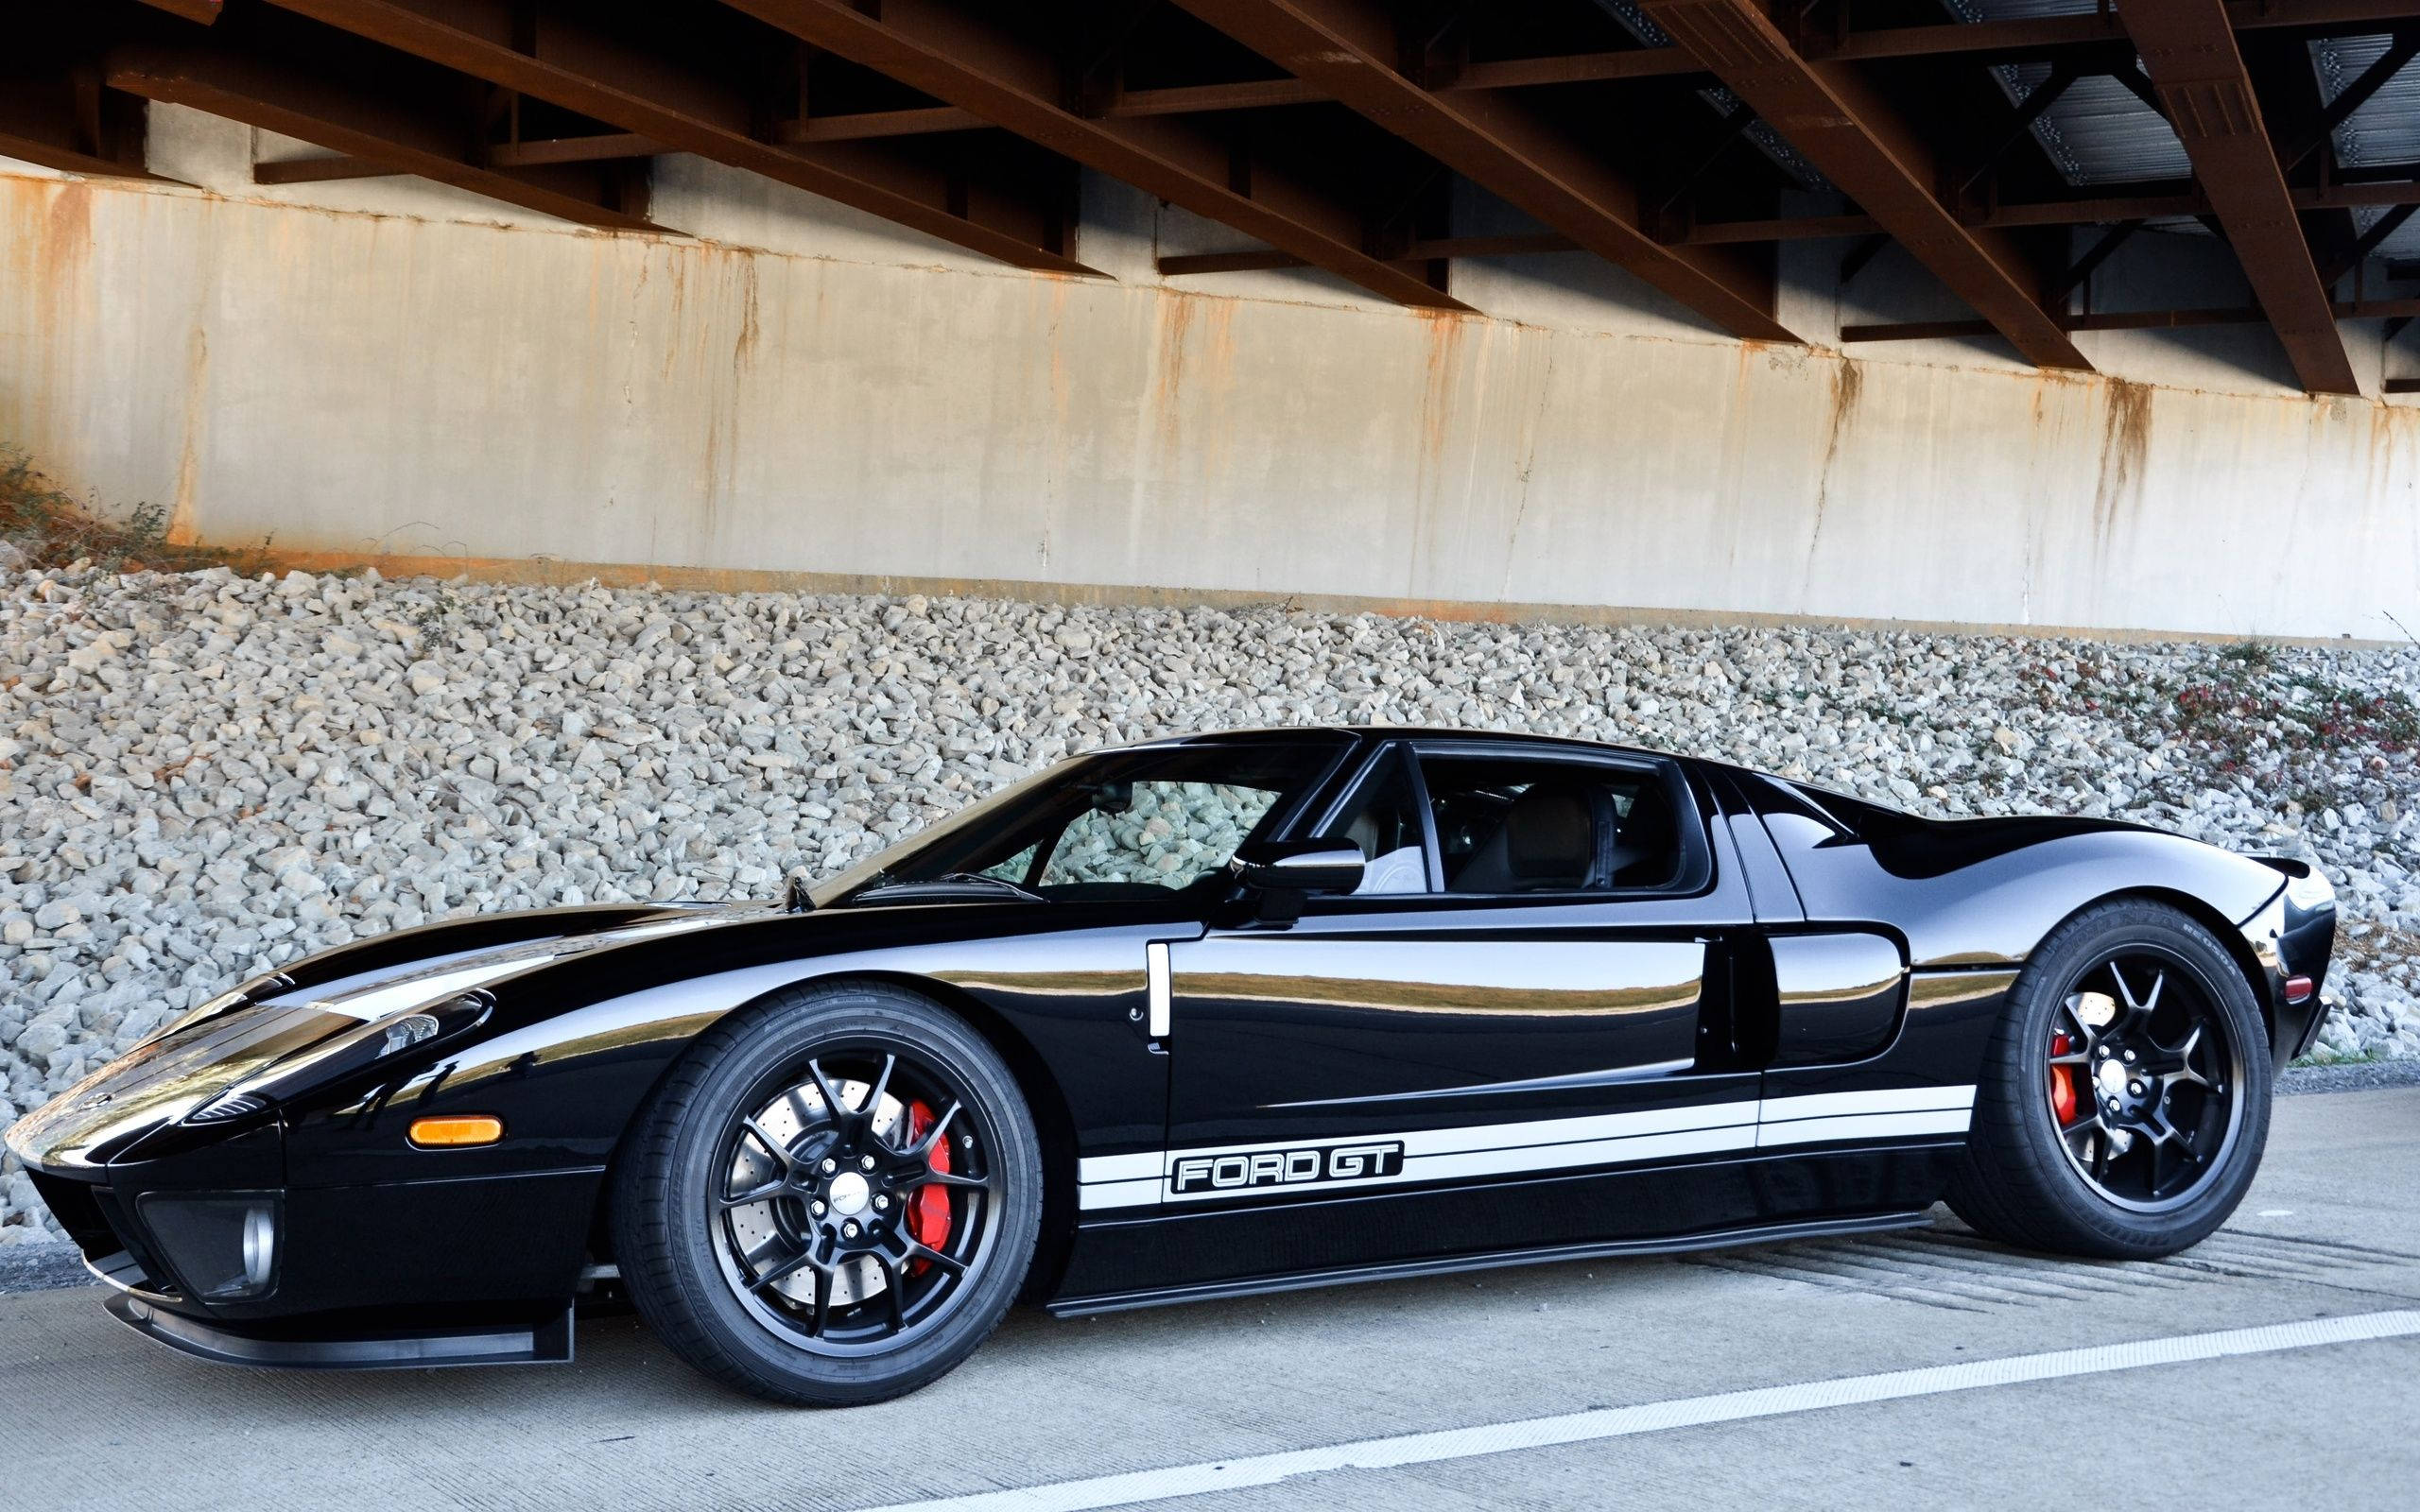 Stunning Black 2005 Ford Gt In Hd